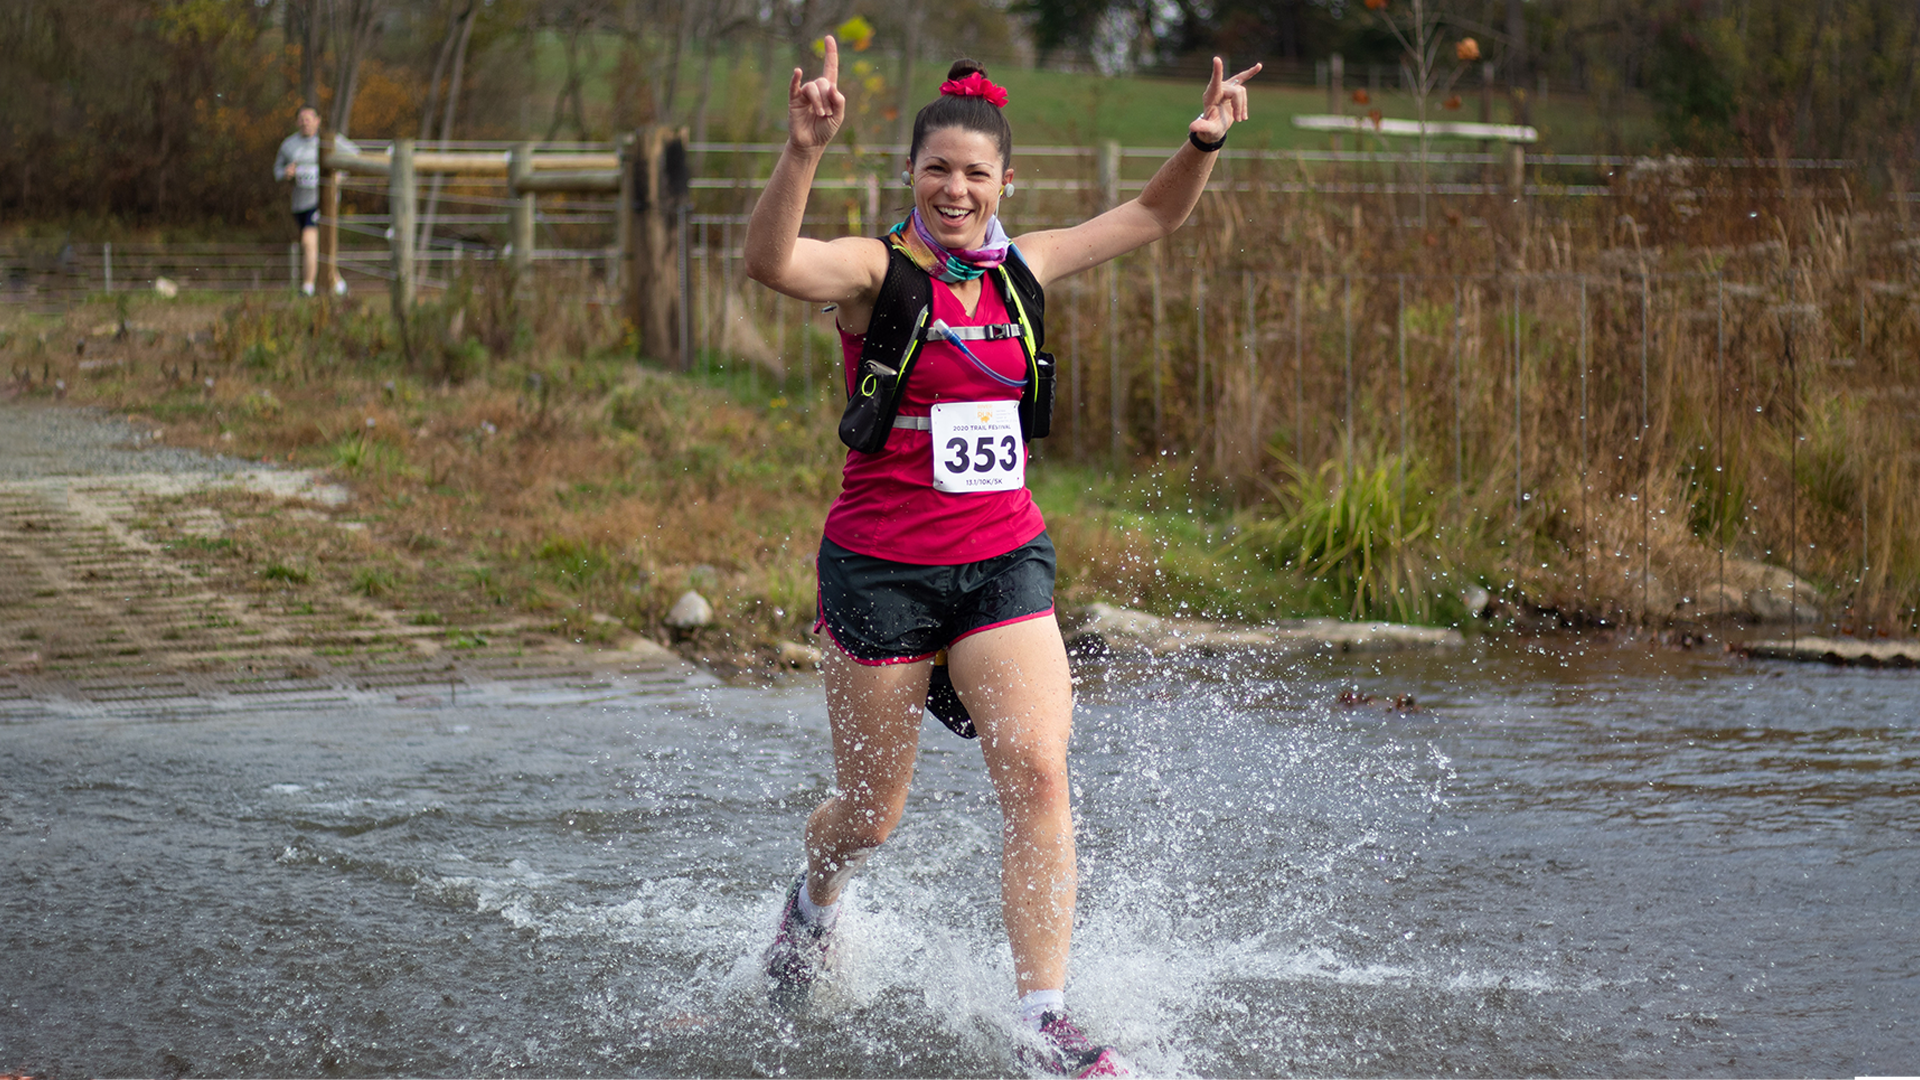 Woman running through a puddle of water while smiling with her hands in the air during the River Valley Trail Race